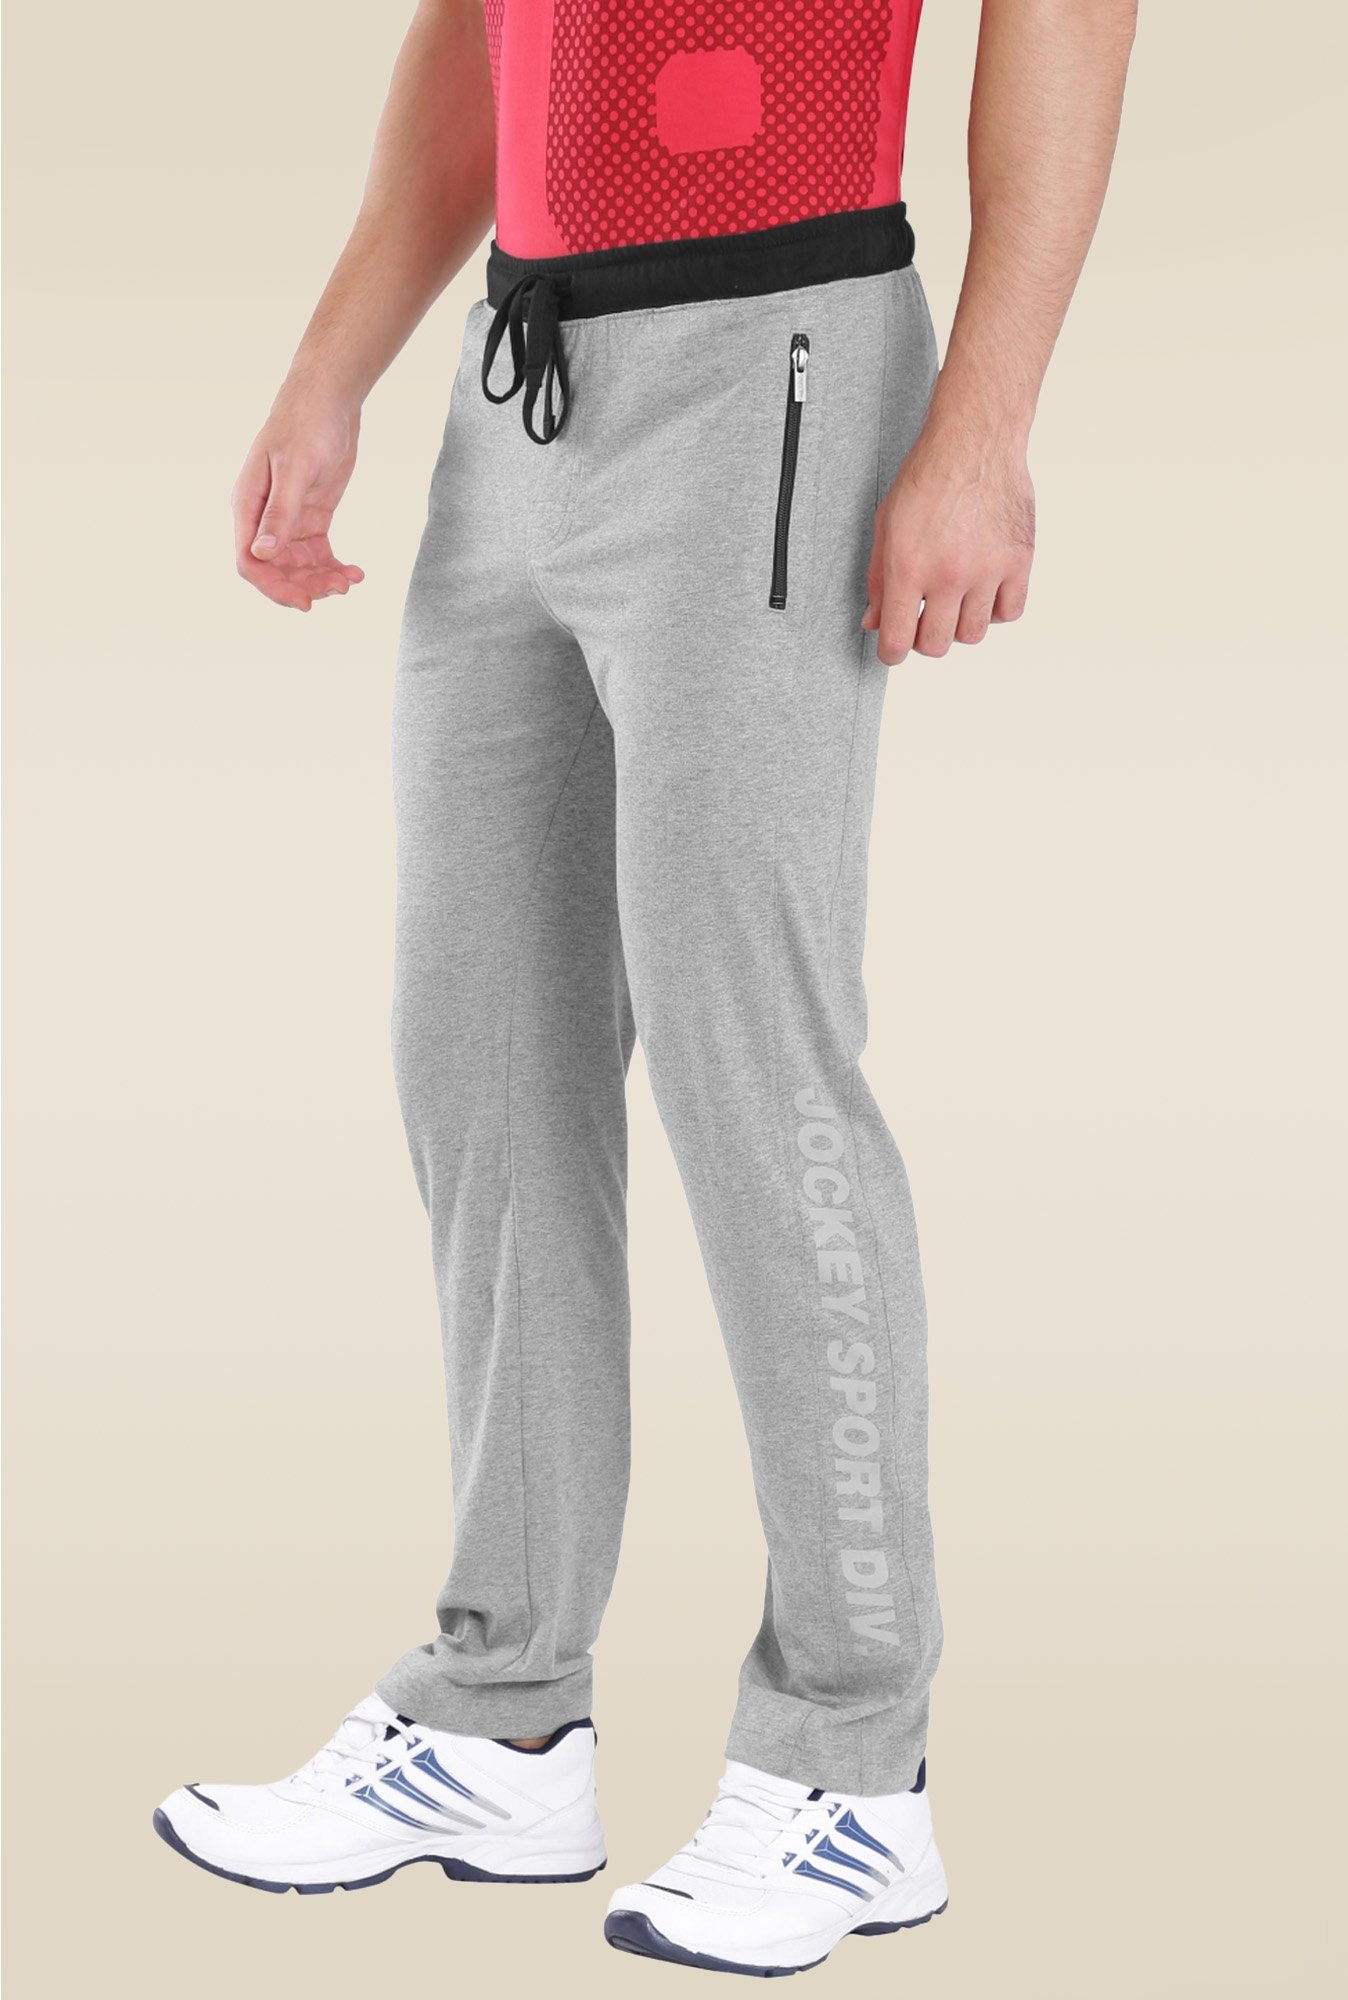 Buy Jockey Charcoal Melange & Black Sports Track Pant - Style Number 9510  Online at Low Prices in India - Paytmmall.com